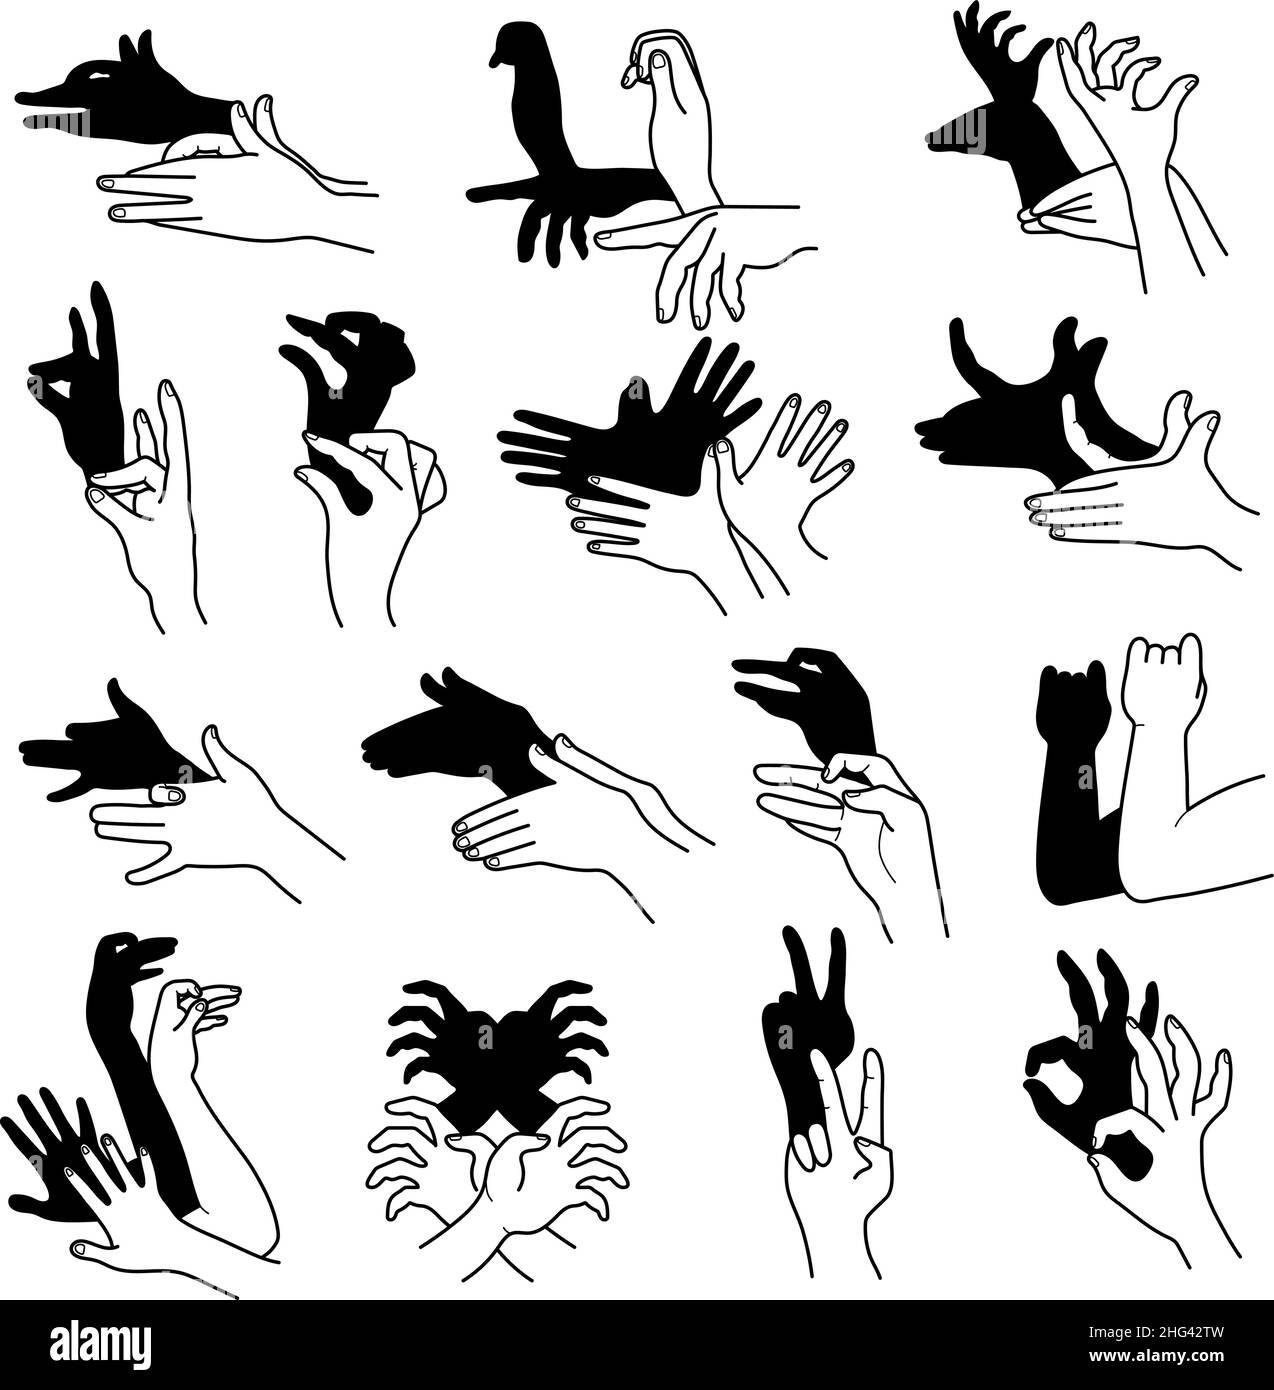 Hands shadow. Theatrical gestures hands puppets creative poses from human fingers different animals birds rabbit bear recent vector illustrations Stock Vector